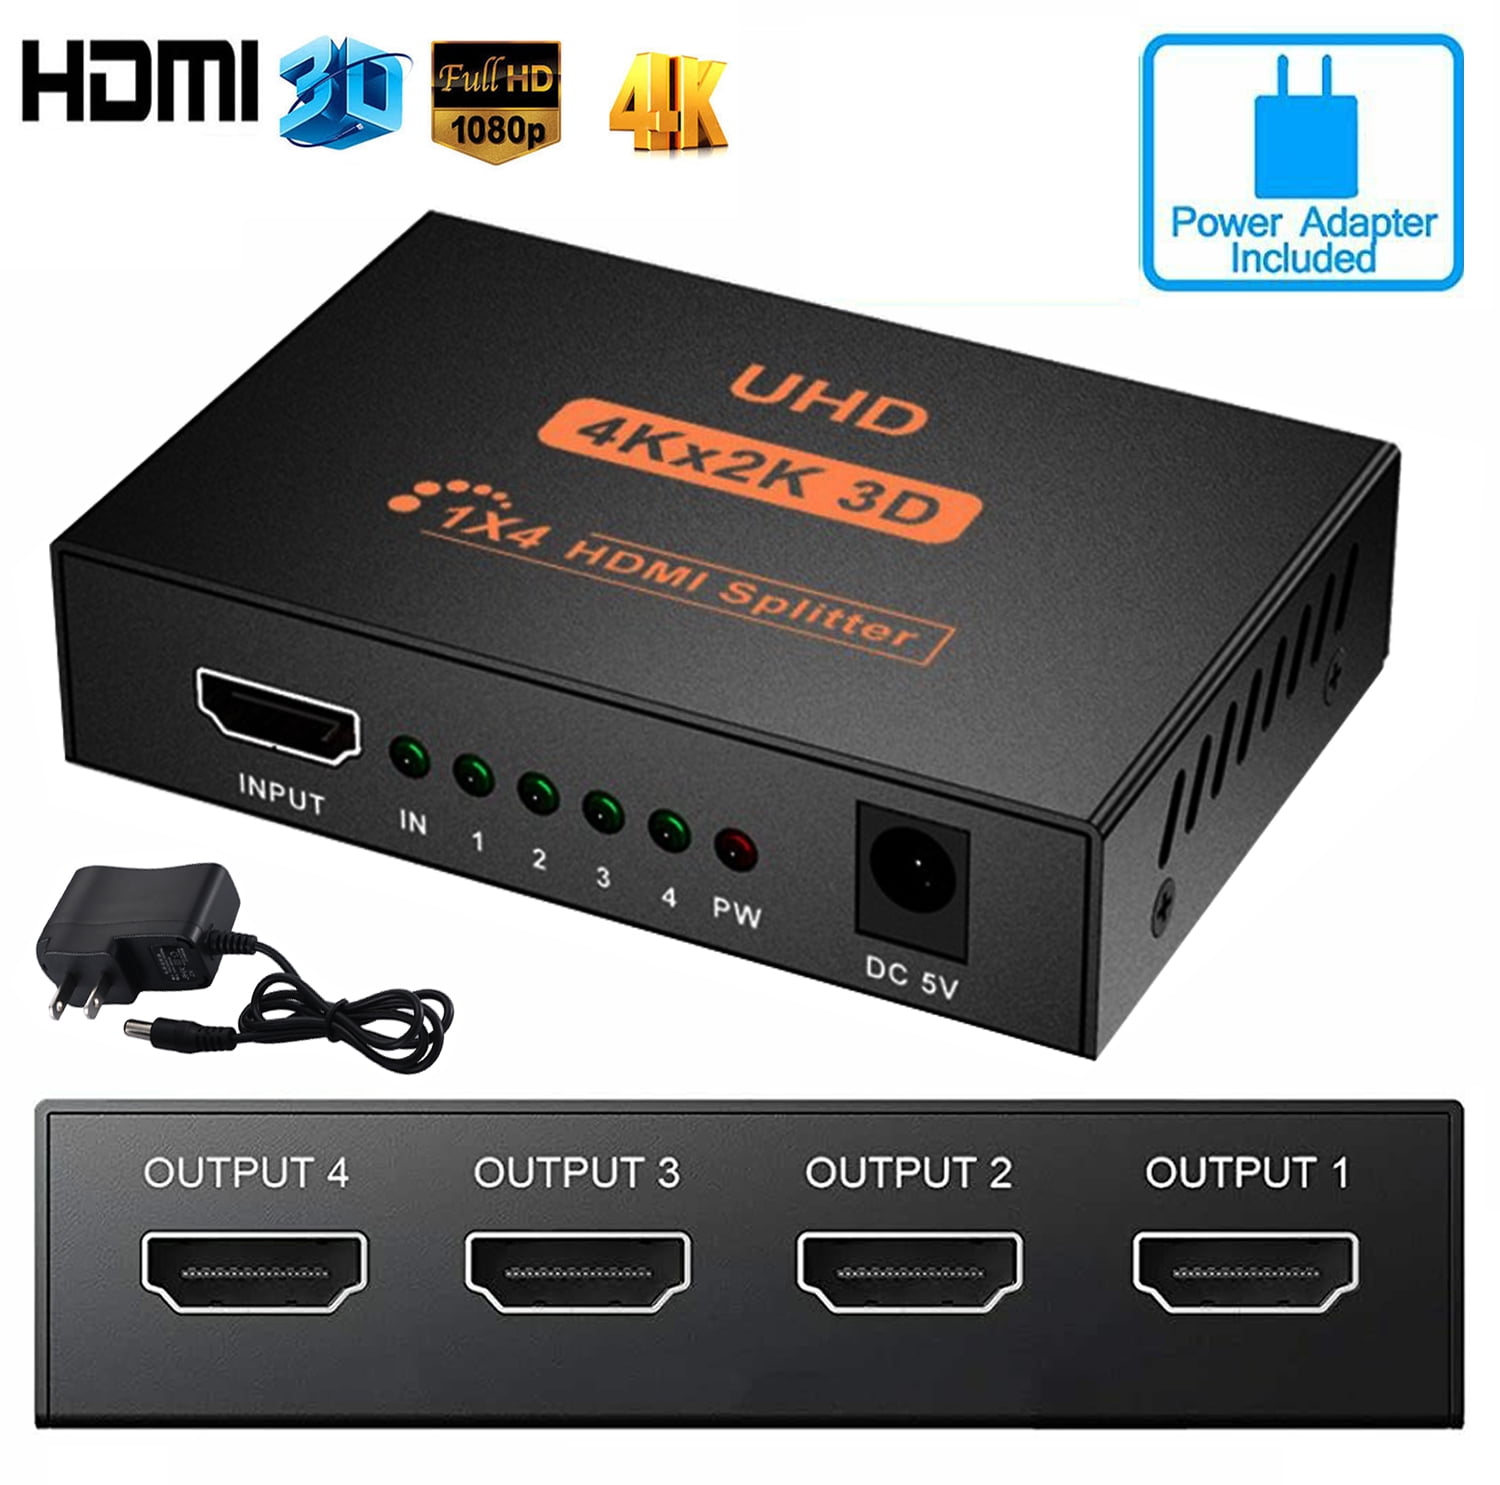 HDMI Splitter 1 in 4 Out 1x4 Hdmi Video Splitter Display Multiple  Duplicate/Mirror Screen,Supports Ultra HD 1080P 4K/2K and 3D,for